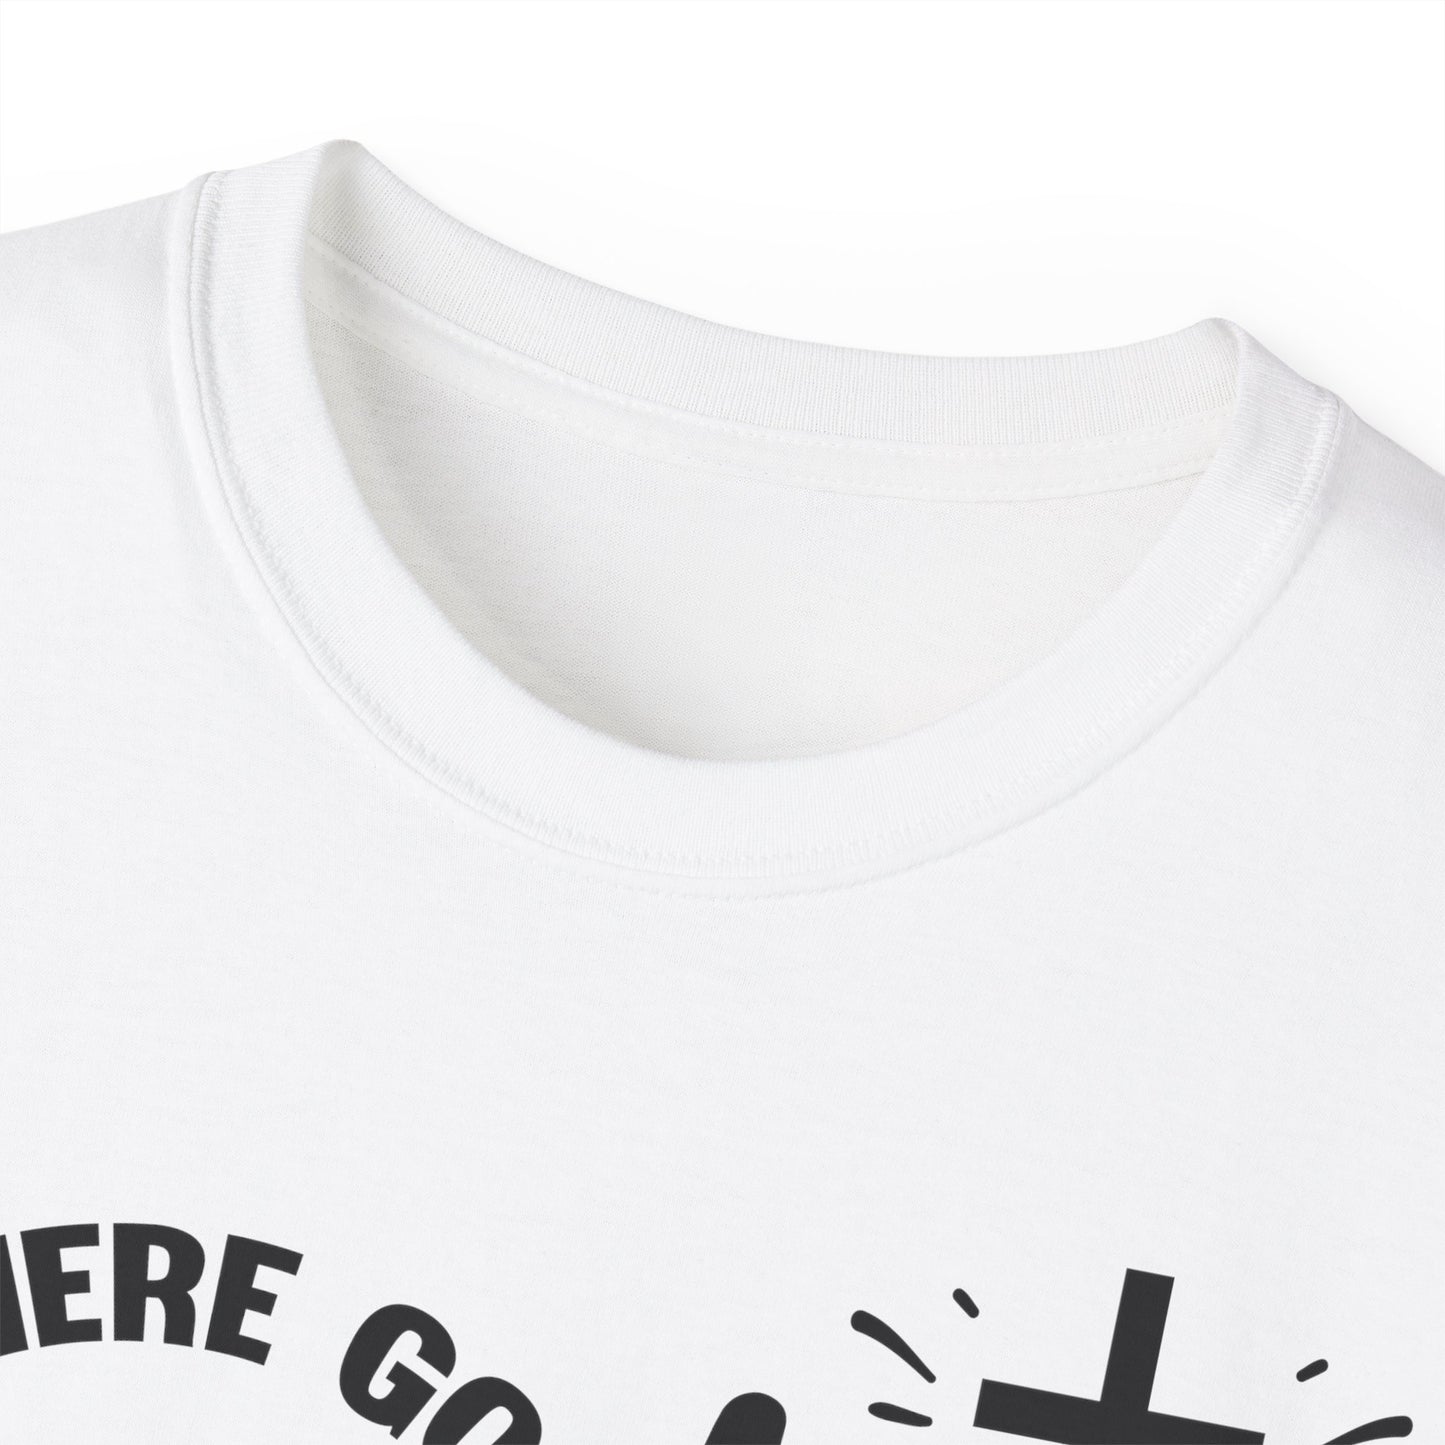 Where God Guides He Provides Unisex Christian Ultra Cotton Tee Printify